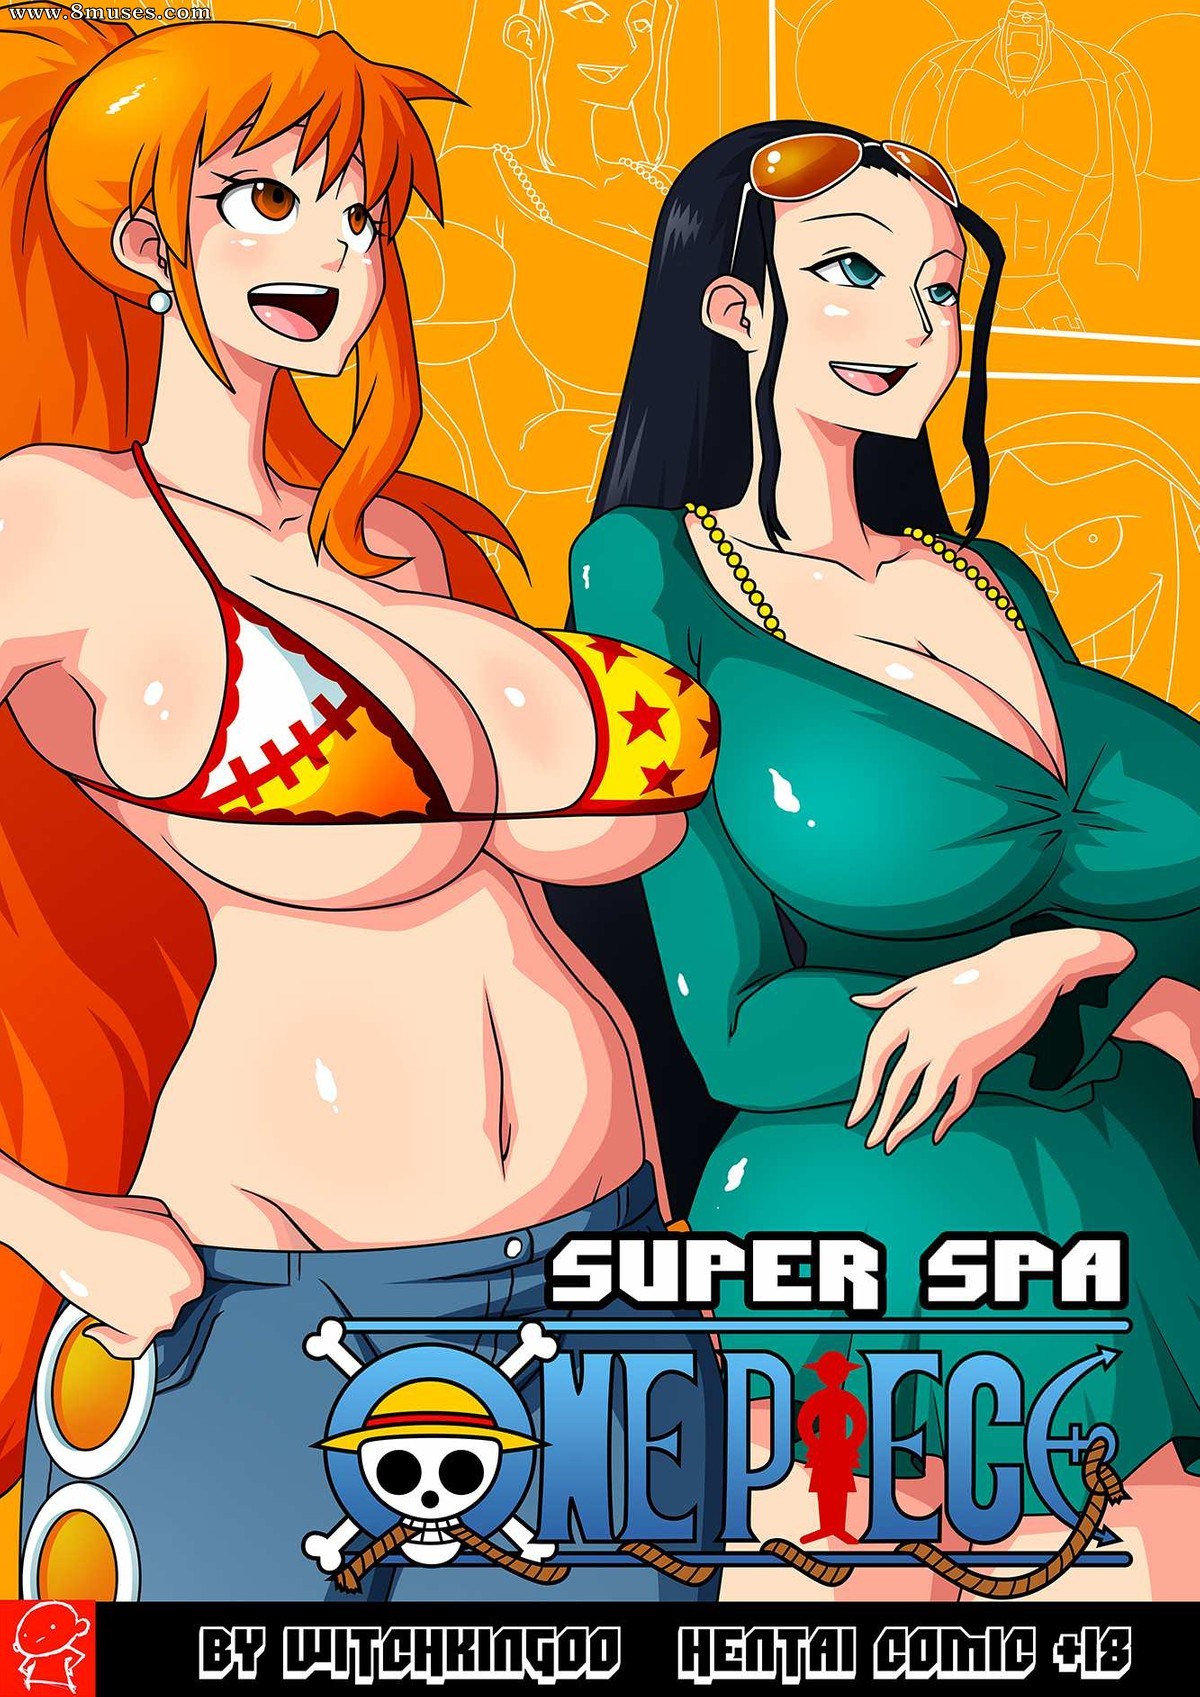 One piece sex game